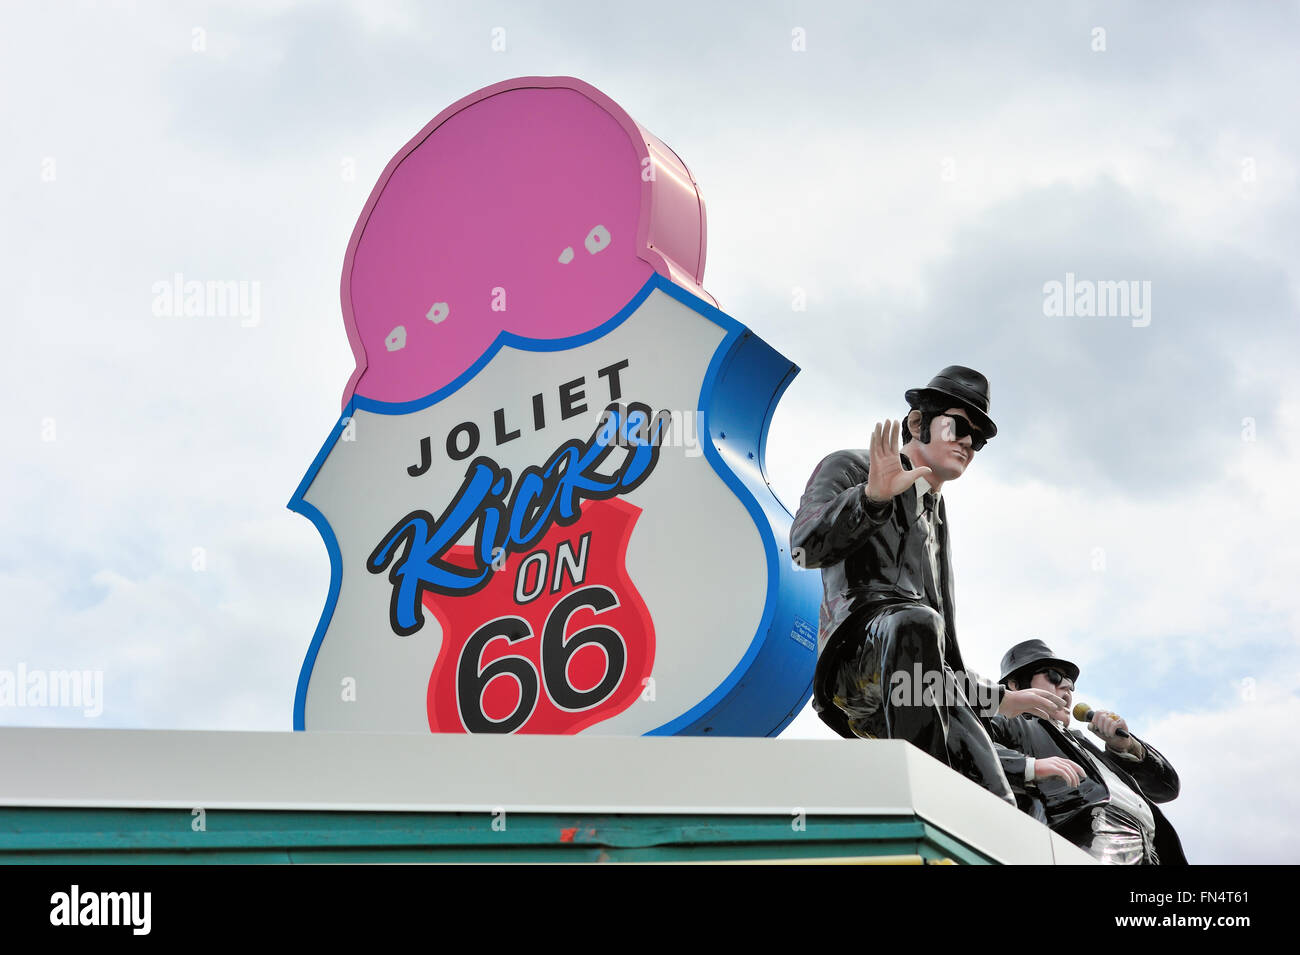 A drive-in restaurant featuring statues of the Blues Brothers on roof along with a sign linking it to the historic Route 66. Joliet, Illinois, USA. Stock Photo